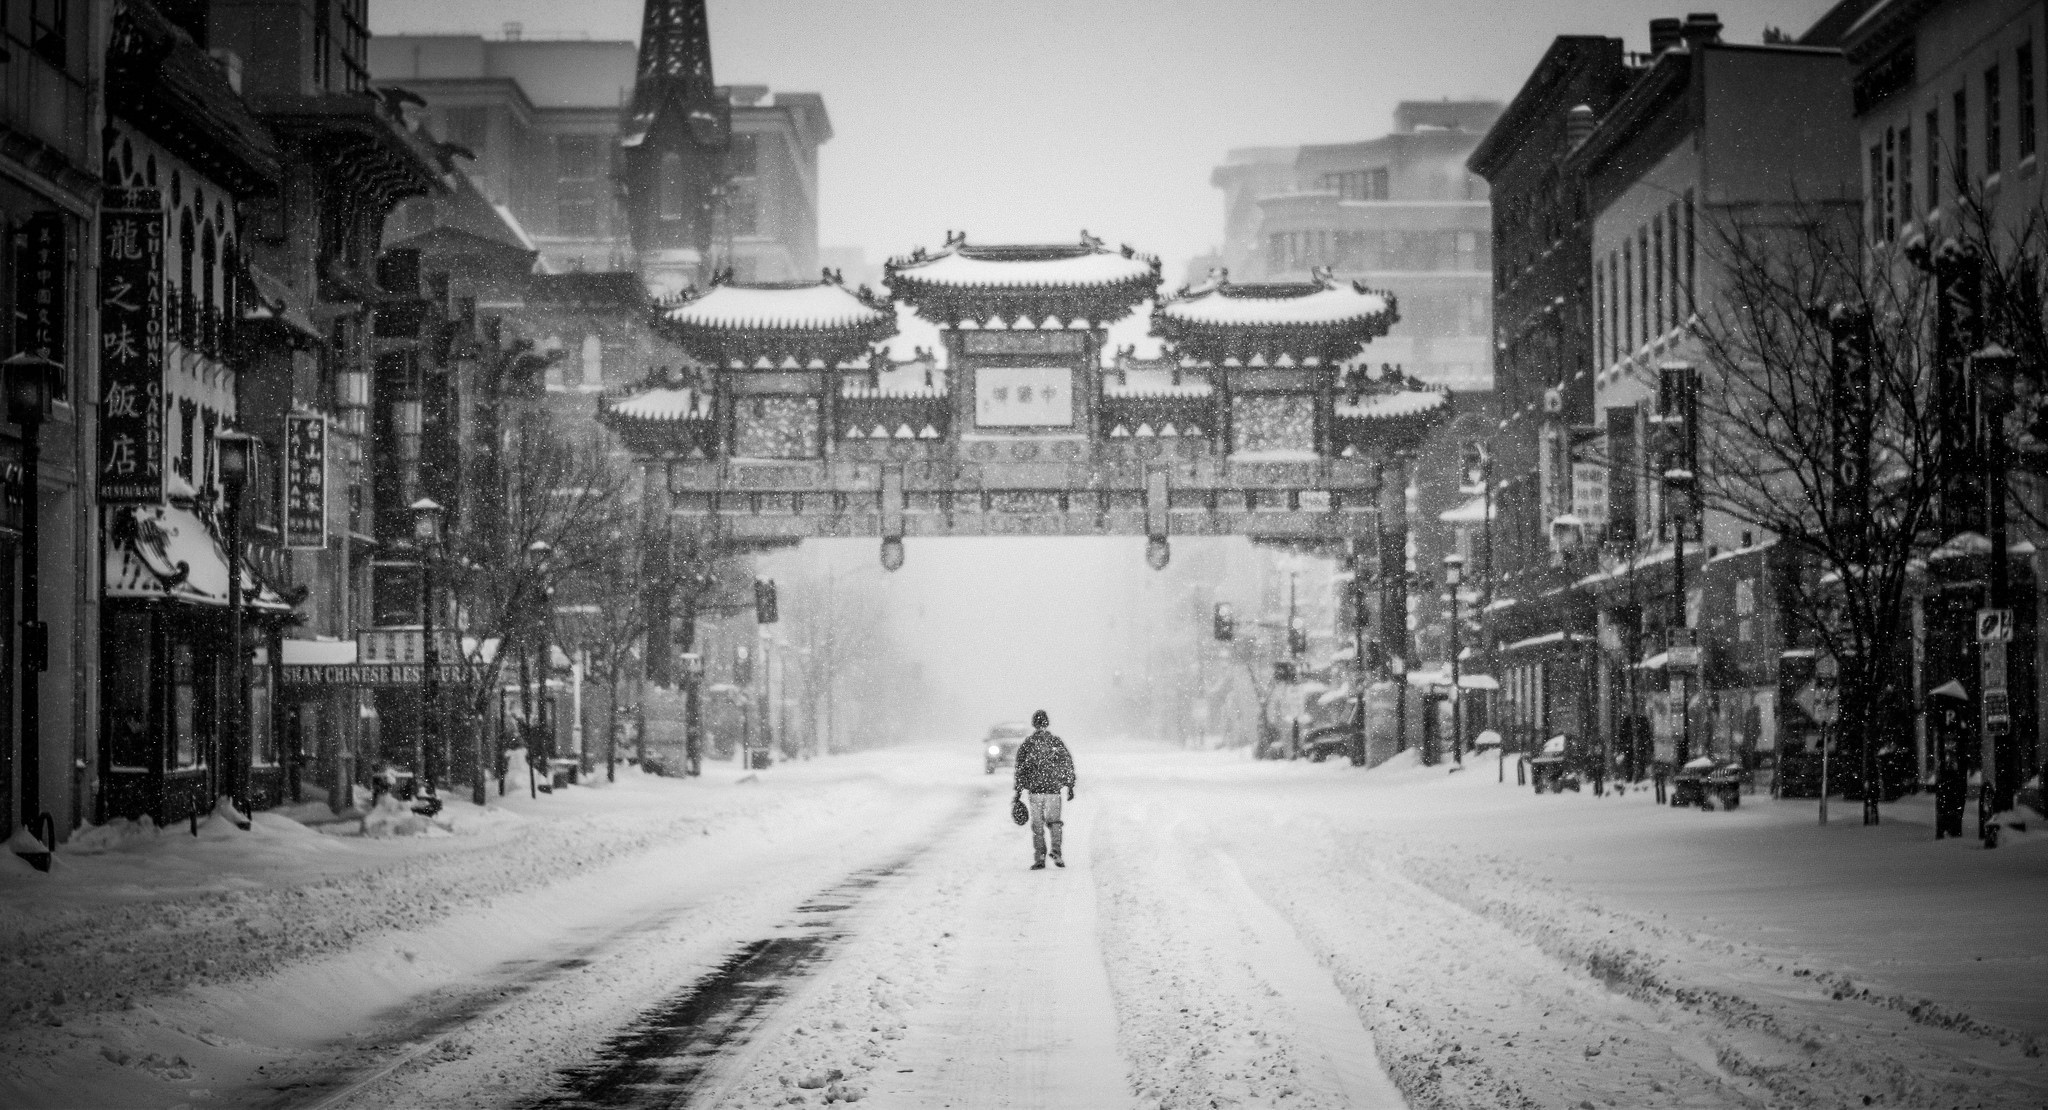 Free Images person, cold, black and white, architecture, road, street, car, building, alley, city, cityscape, asian, store, weather, lane, season, flake,